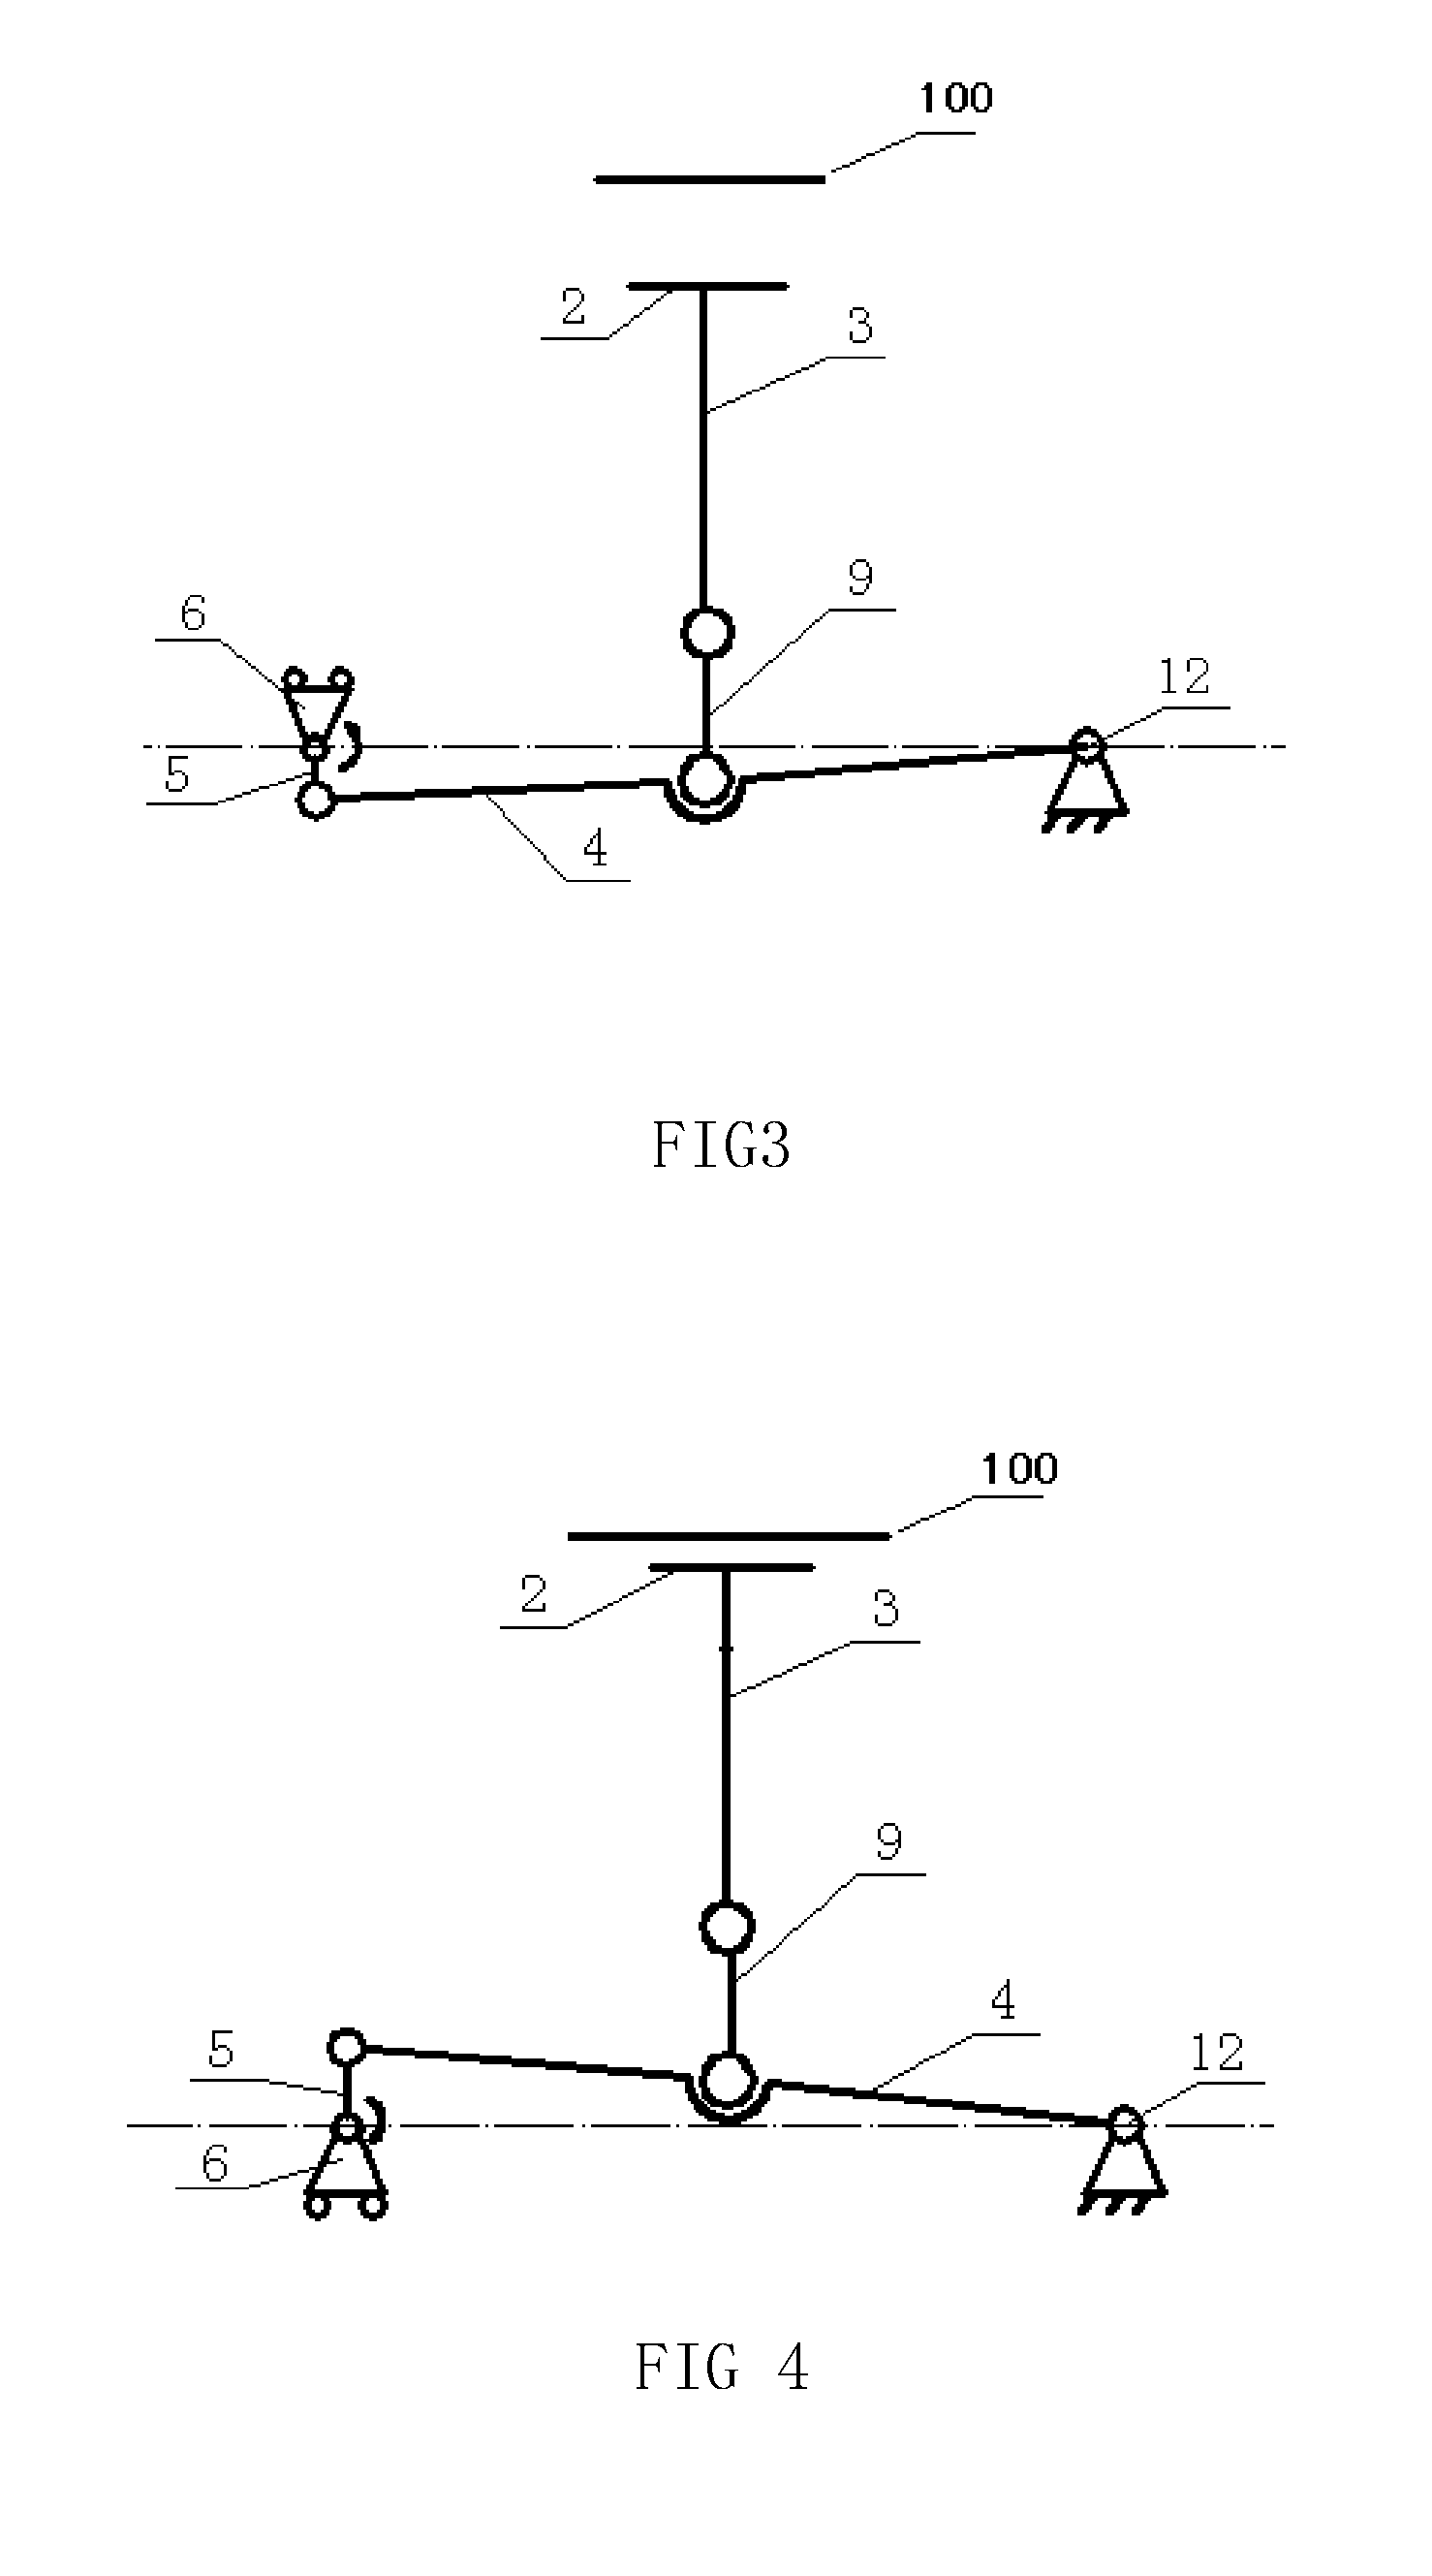 Engine With Variable Compression Ratio